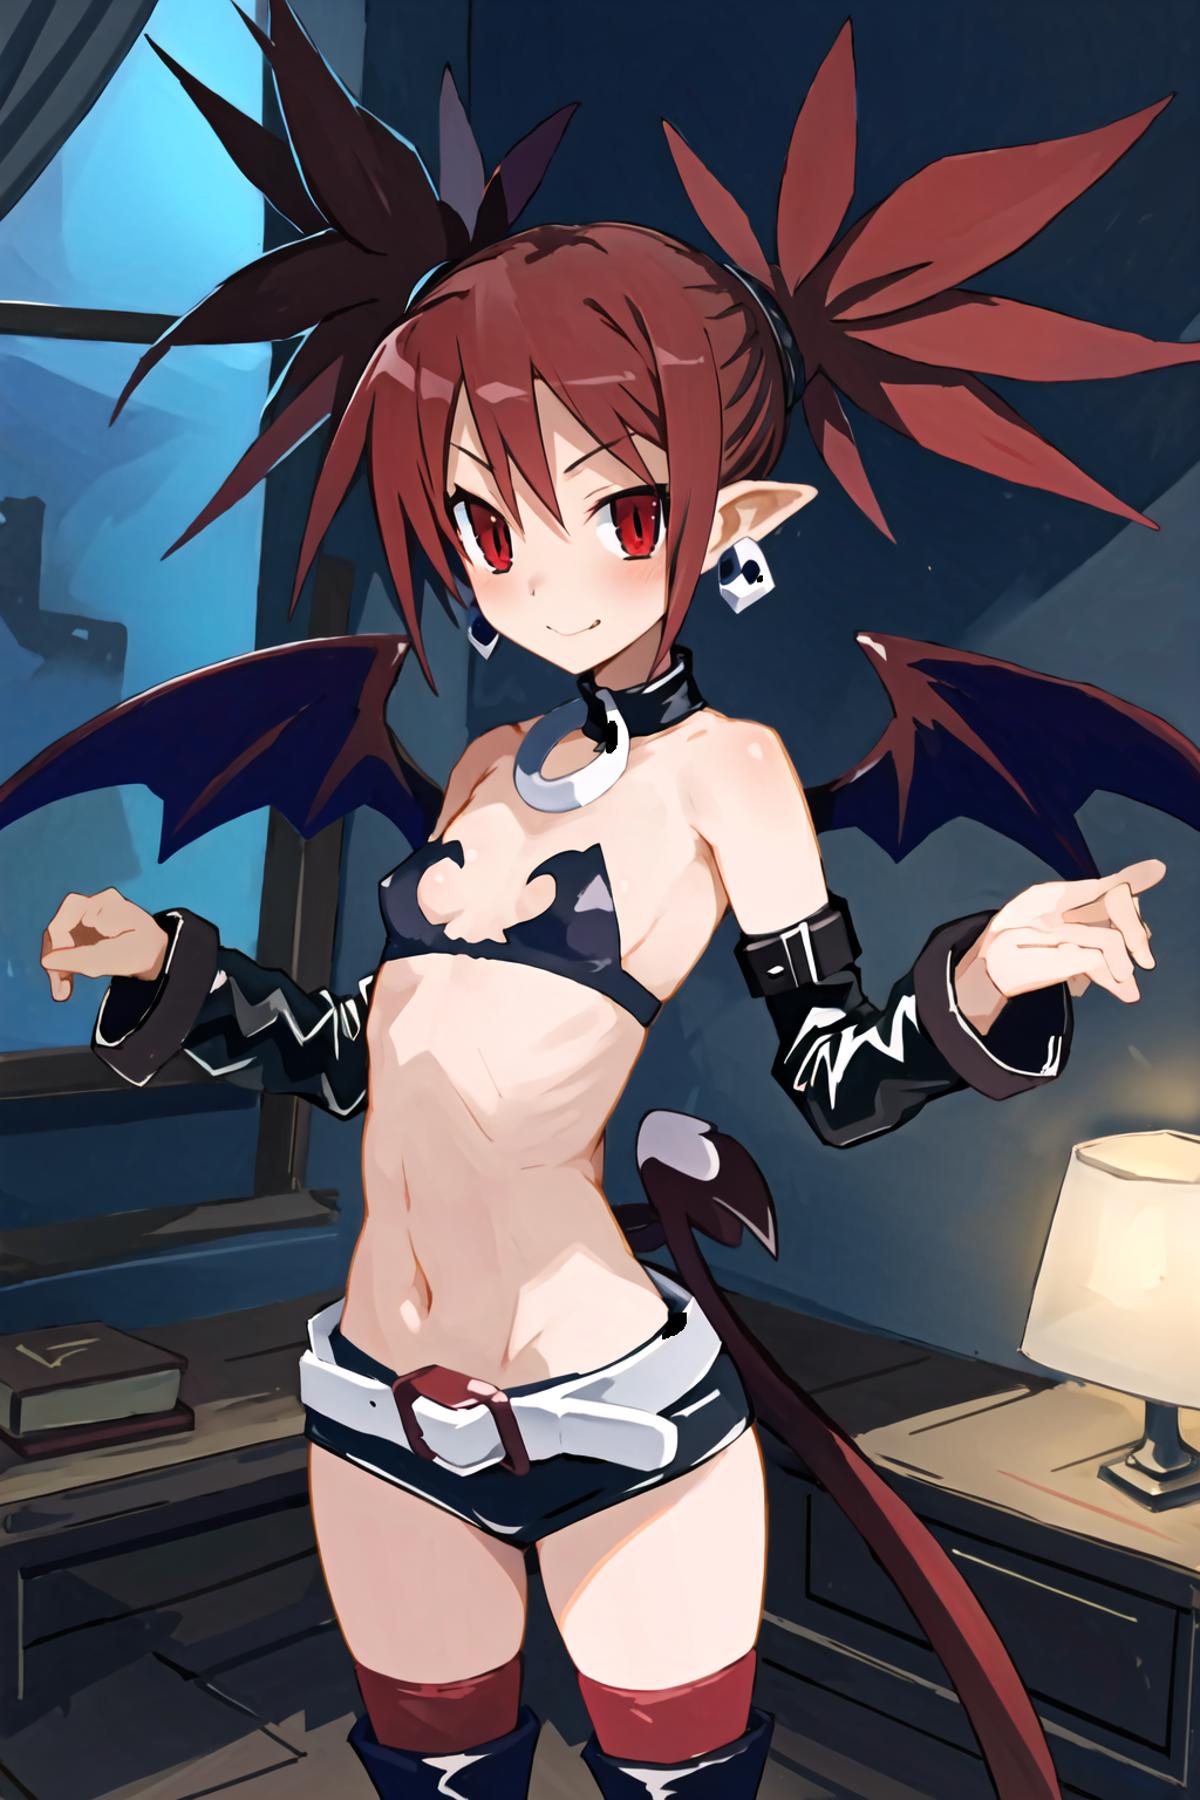 Etna from Disgaea image by bittercat